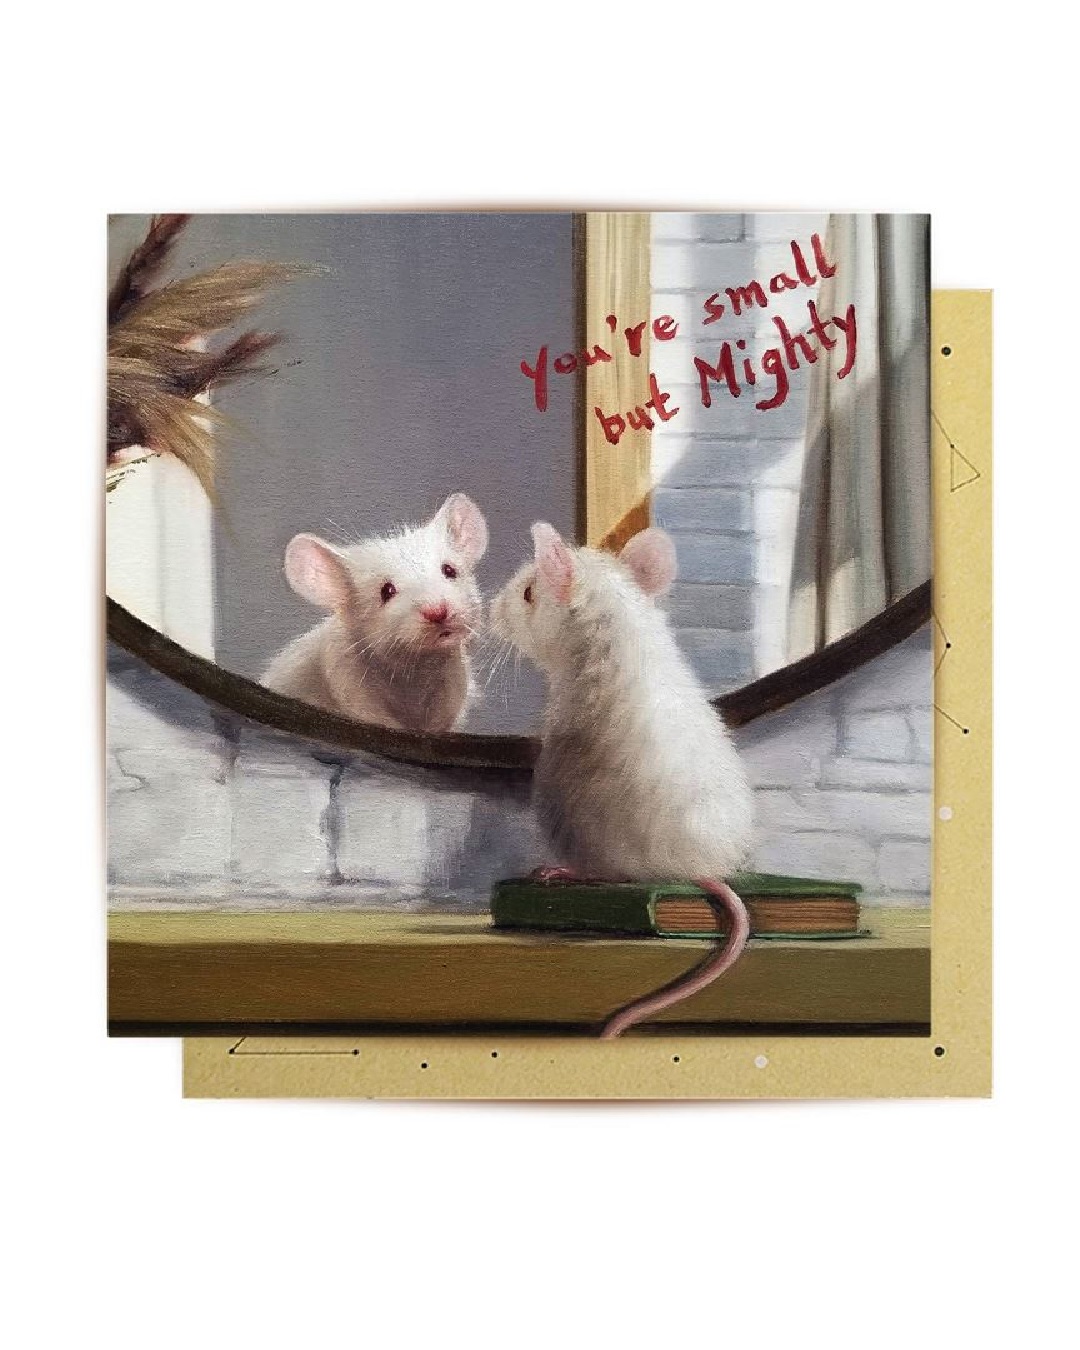 Card with mouse looking in the mirror with writing on the mirror and reads youre small but mighty